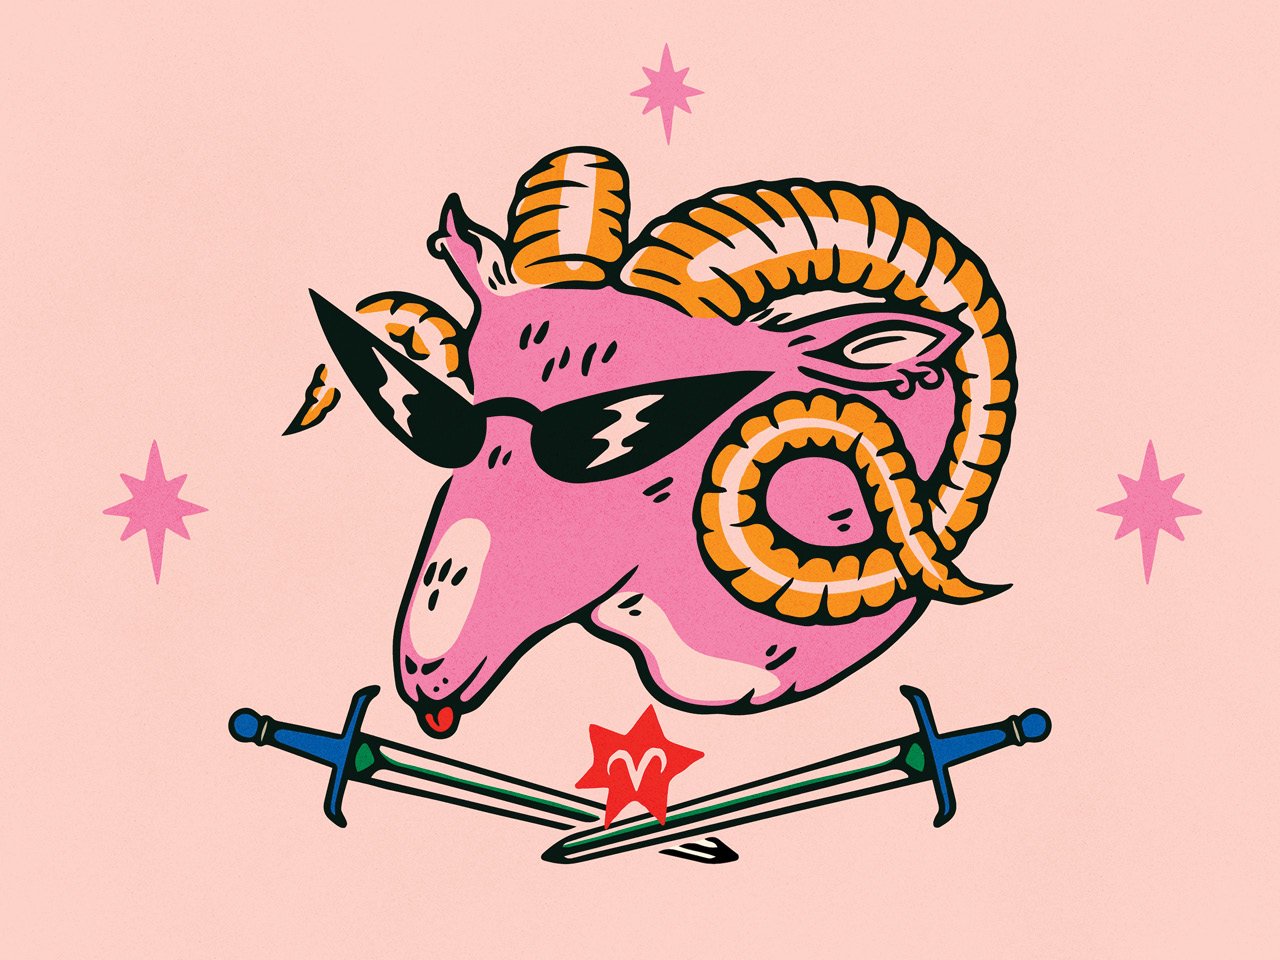 An illustration of a pink ram head wearing sunglasses. The symbol for Aries is shown on a star beneath the ram's head above two crossed swords